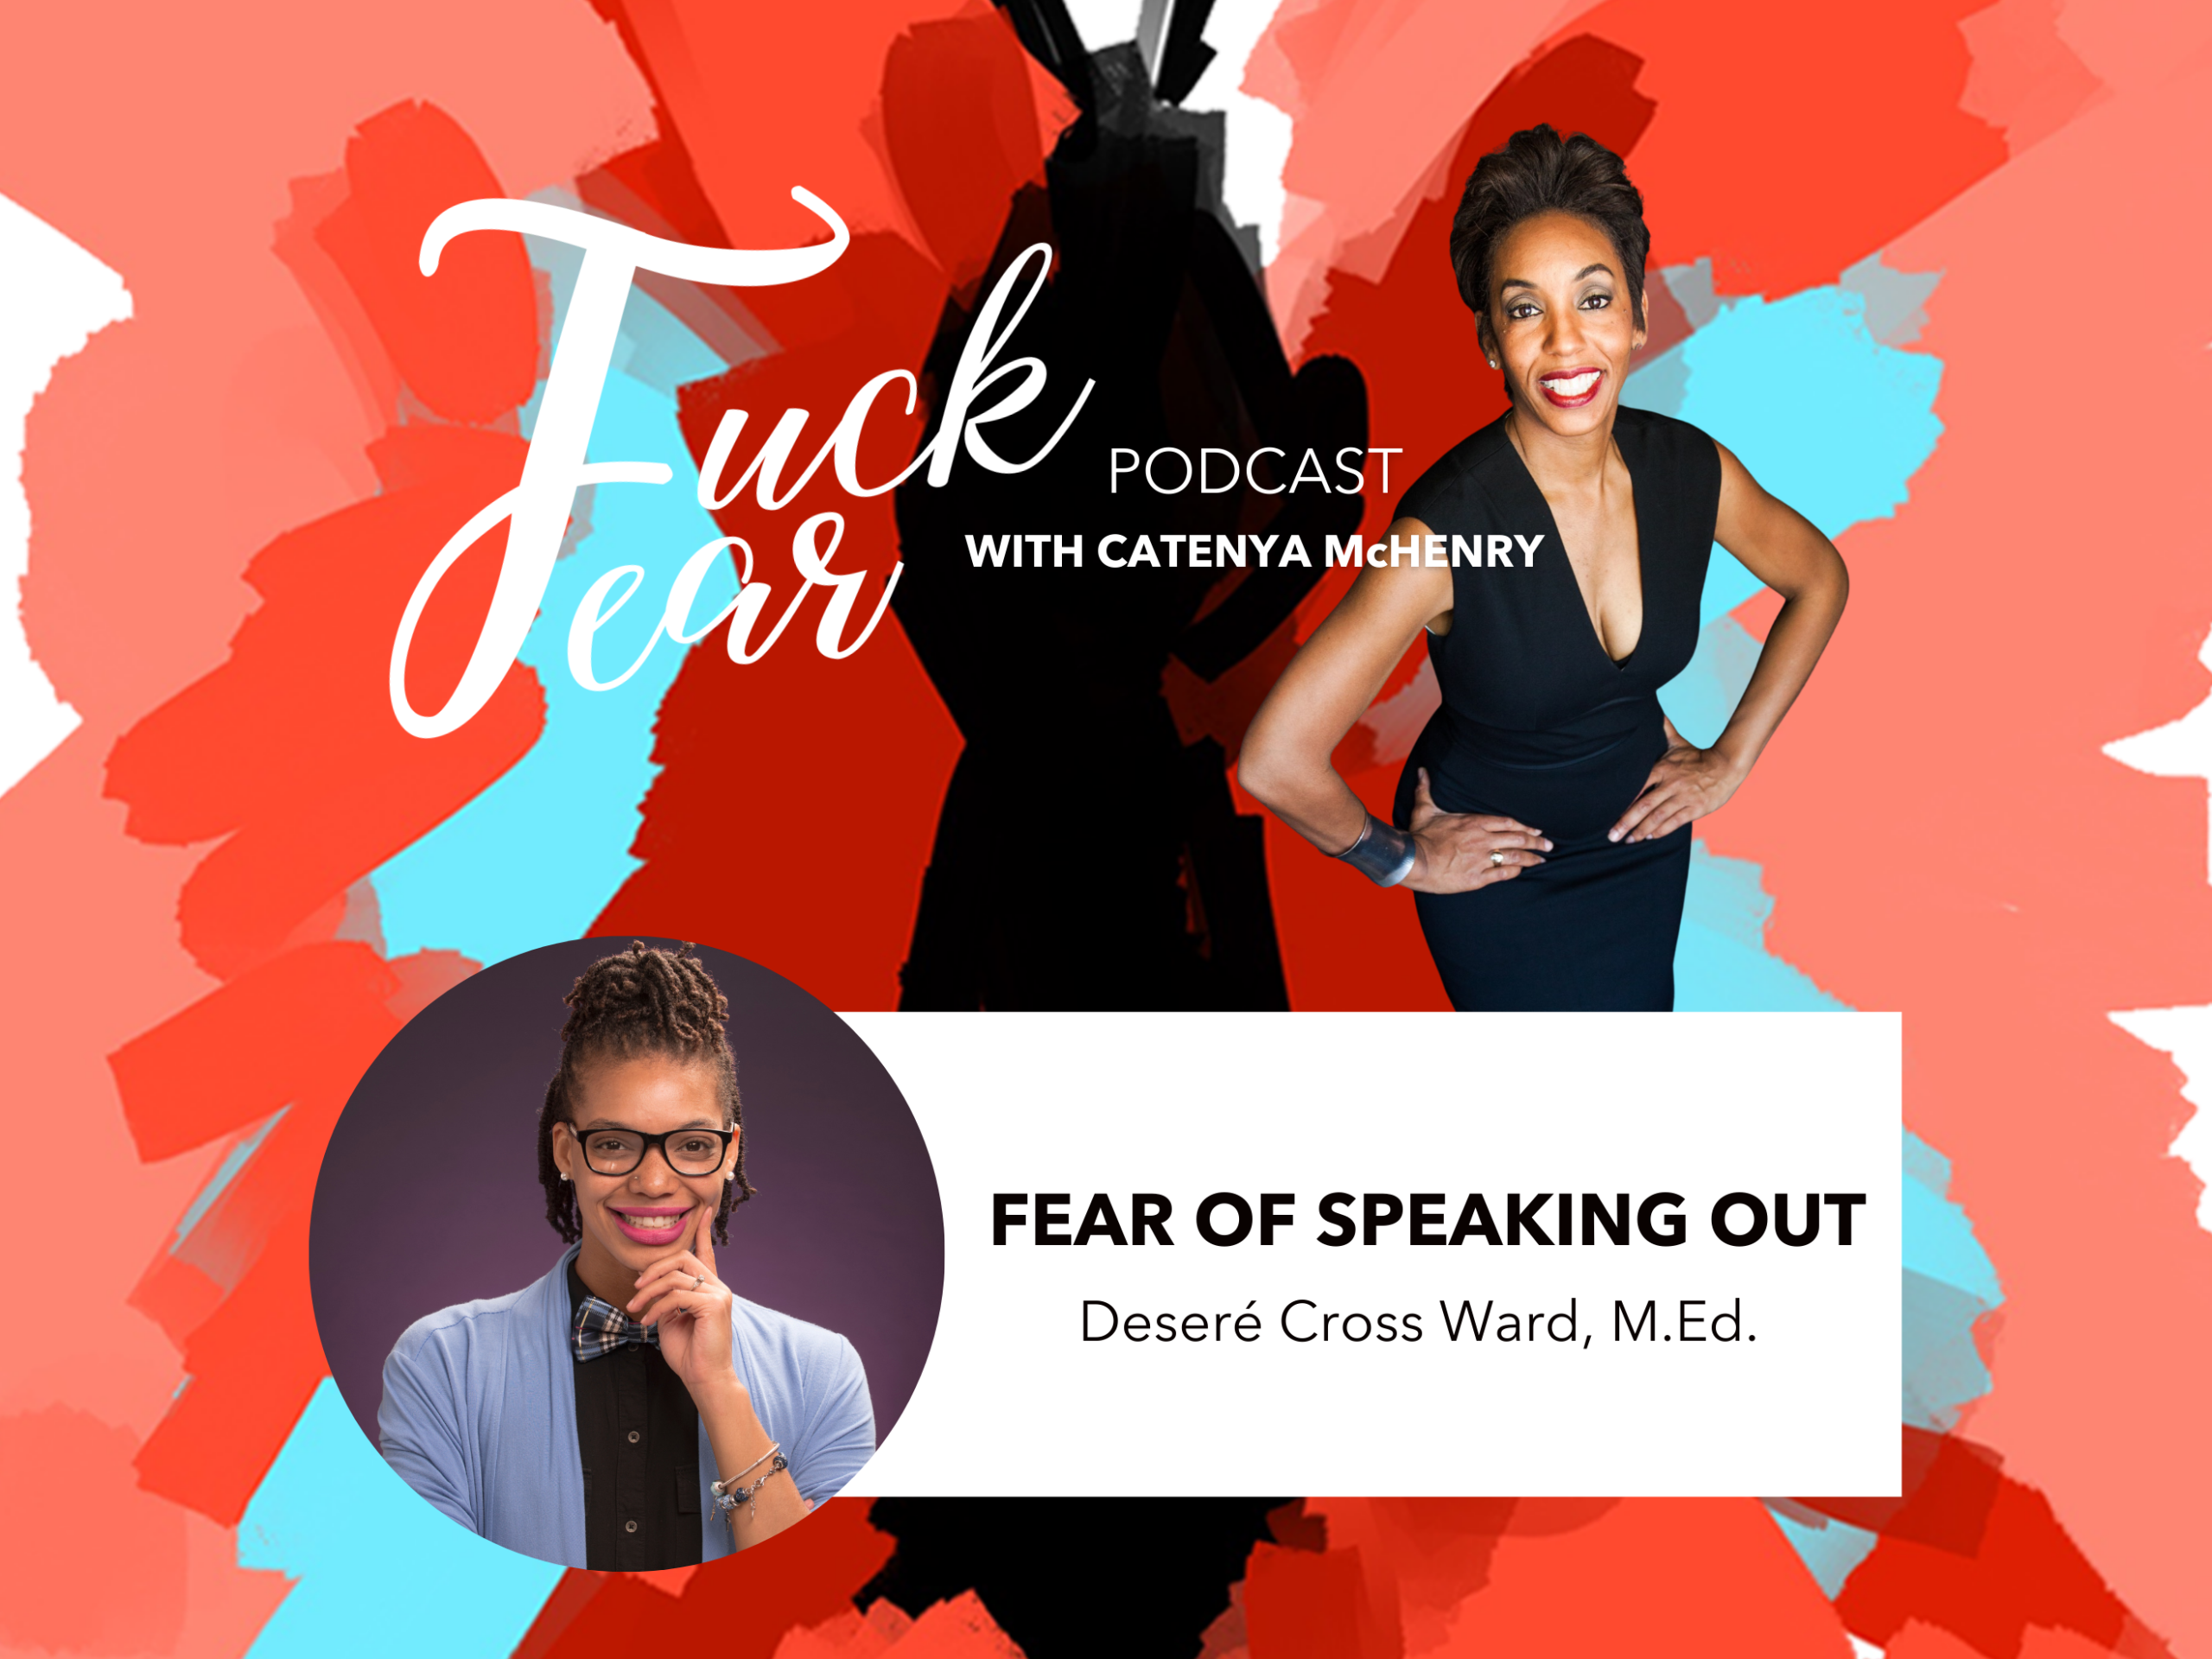 Desere Cross Ward is a guest on season 2 episode 3 titled Fear of Speaking Out on the Fuck Fear Podcast with host Catenya McHenry